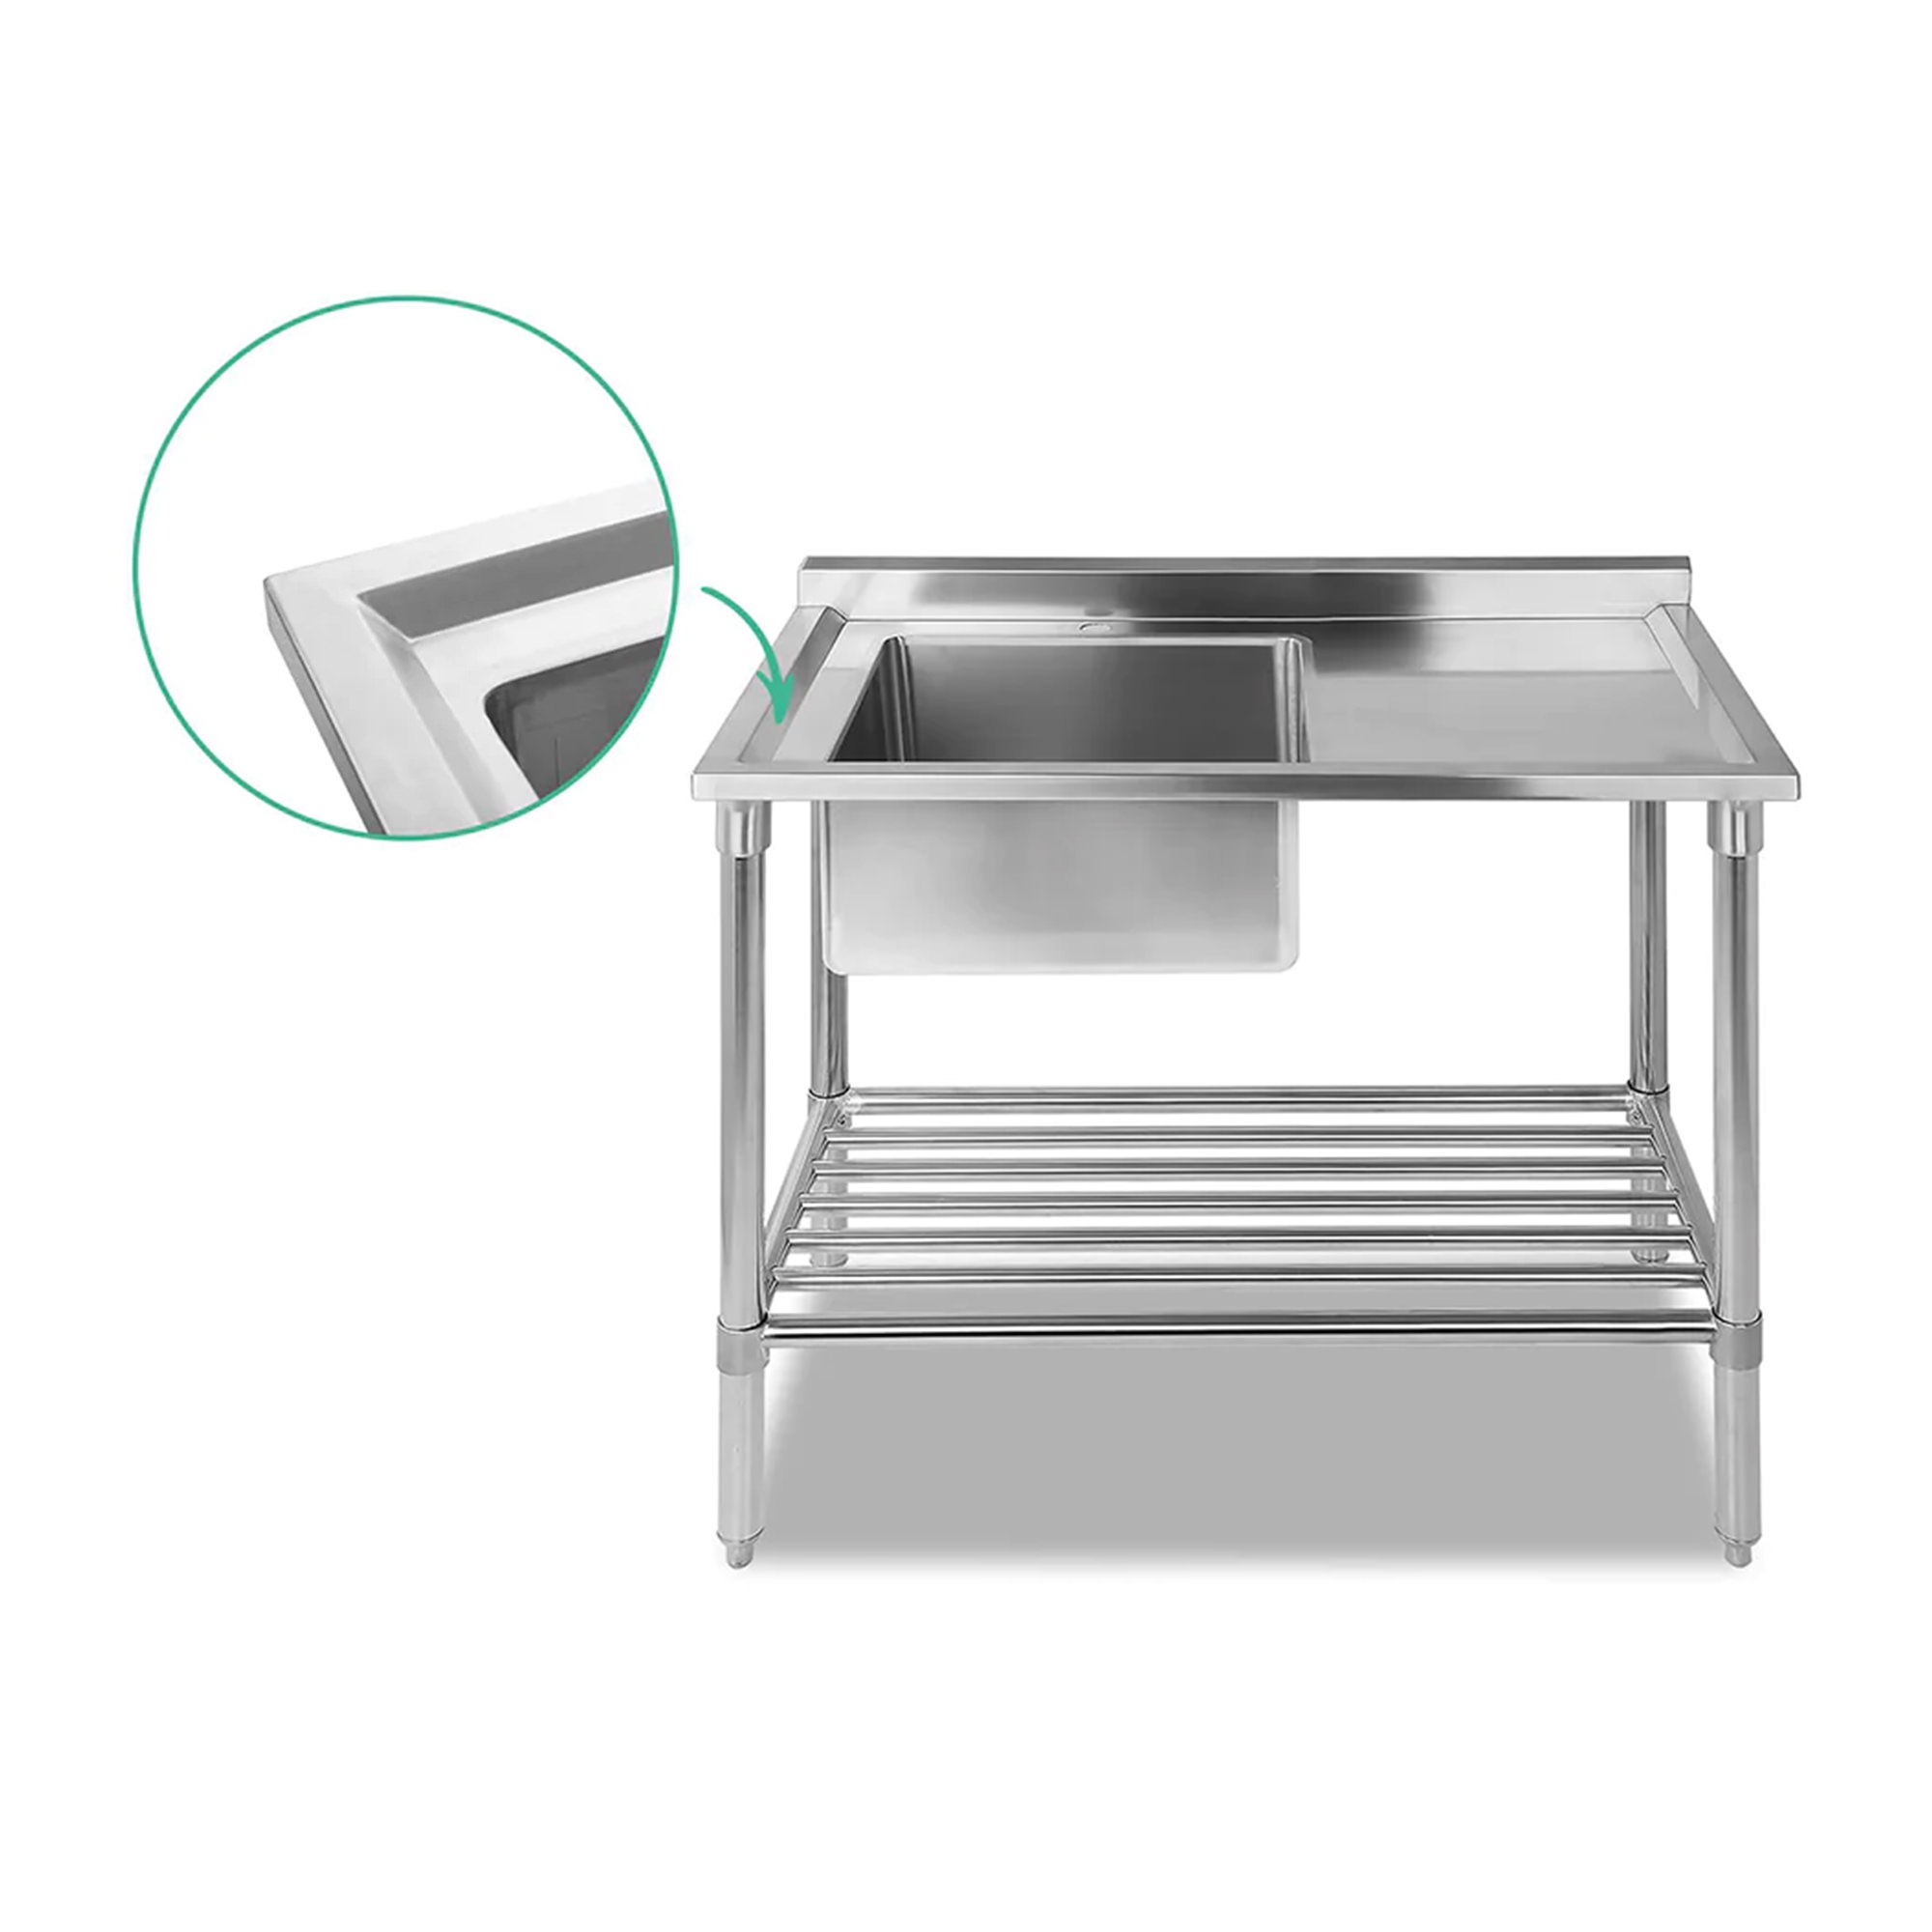 Cefito 304 Stainless Steel Kitchen Bench with Sink 100x60cm Image 2